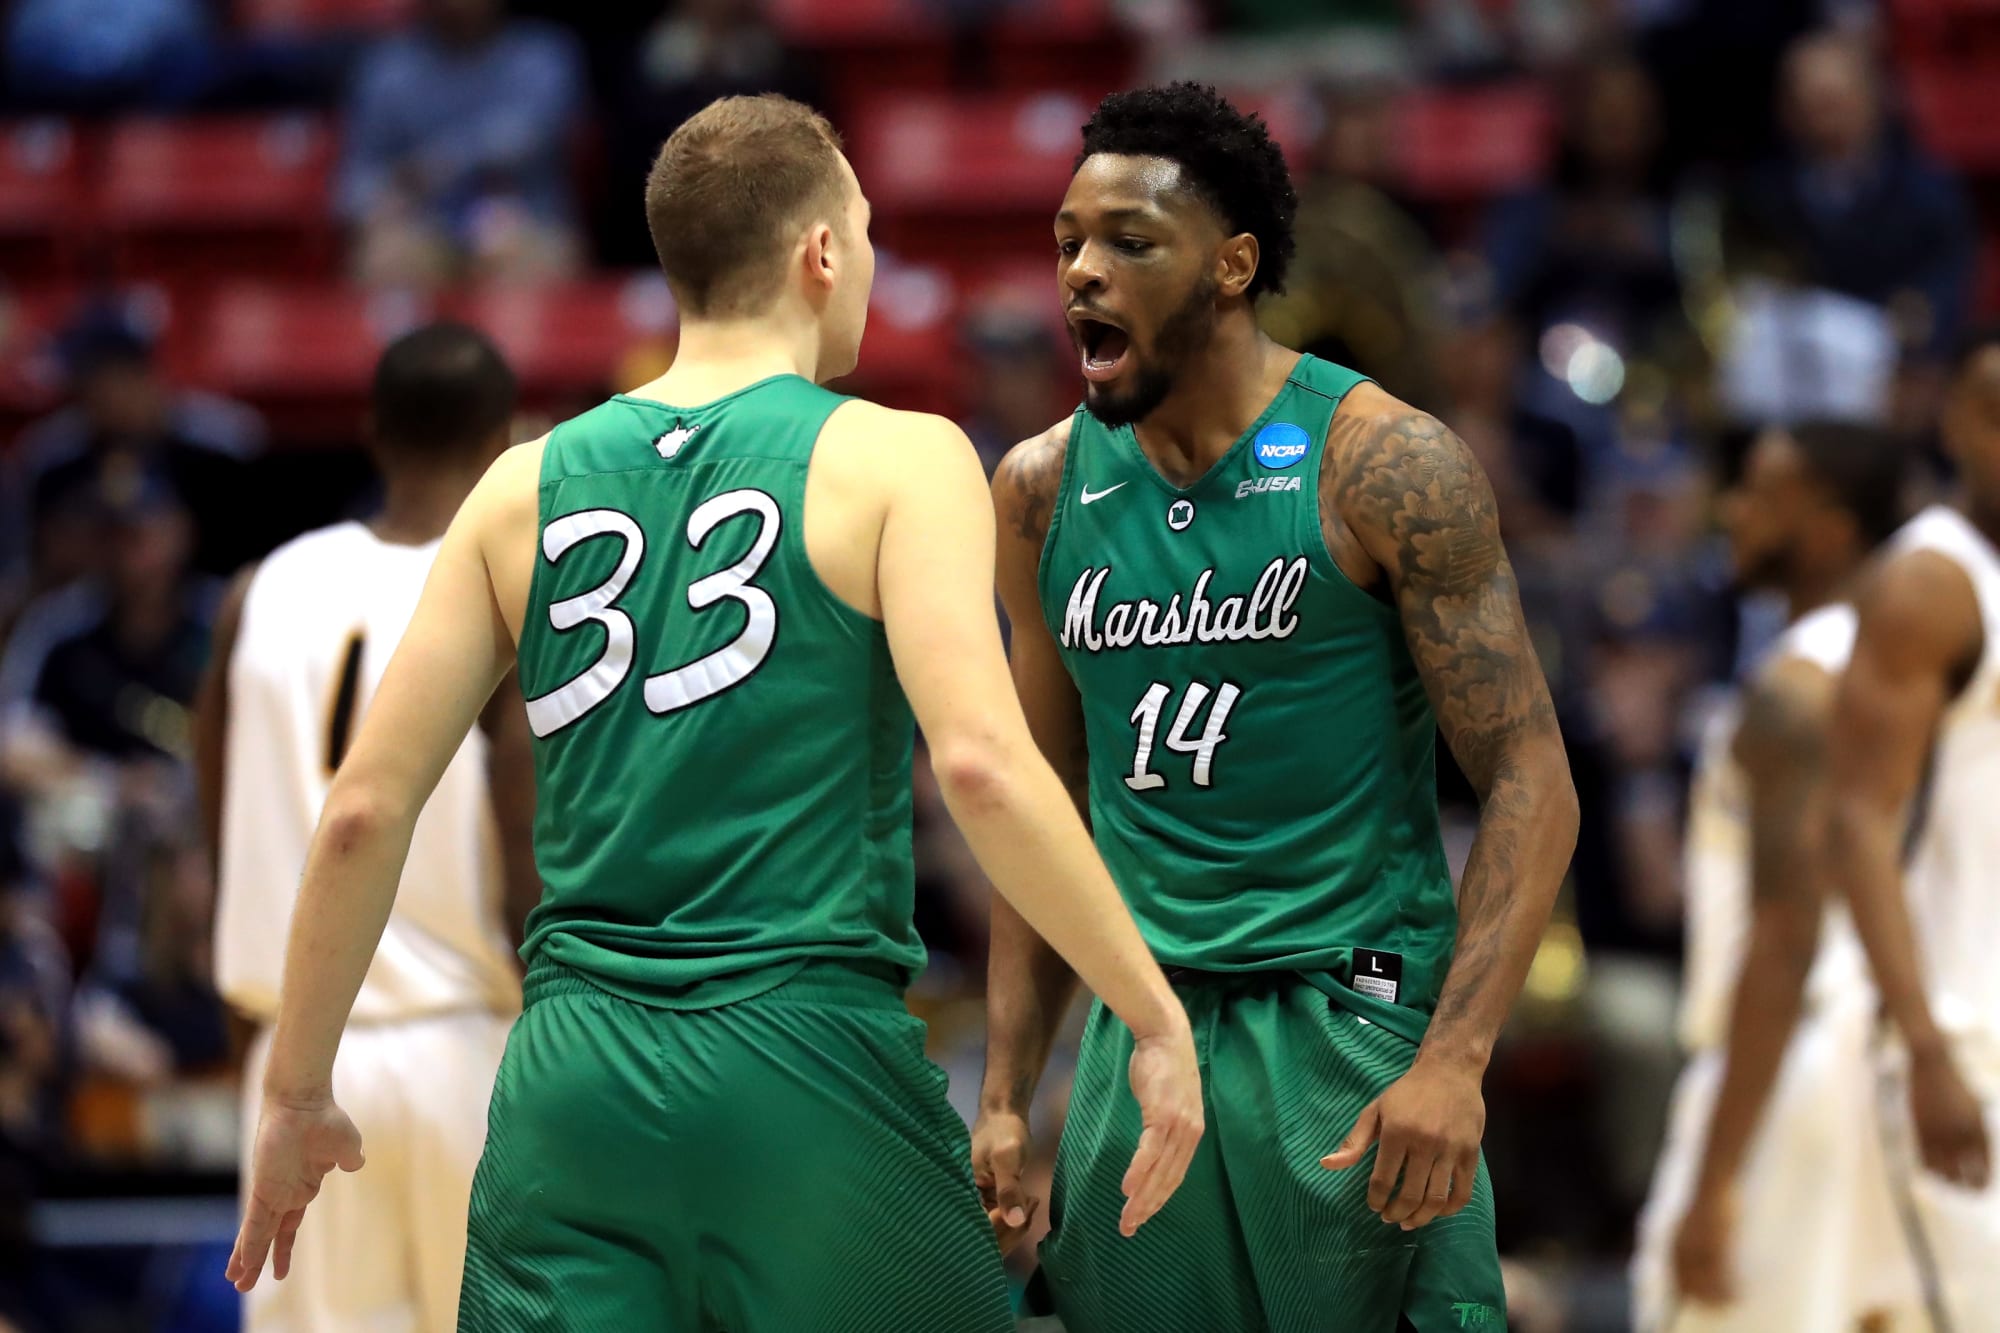 Conference USA Basketball Wild conference tournament approaches